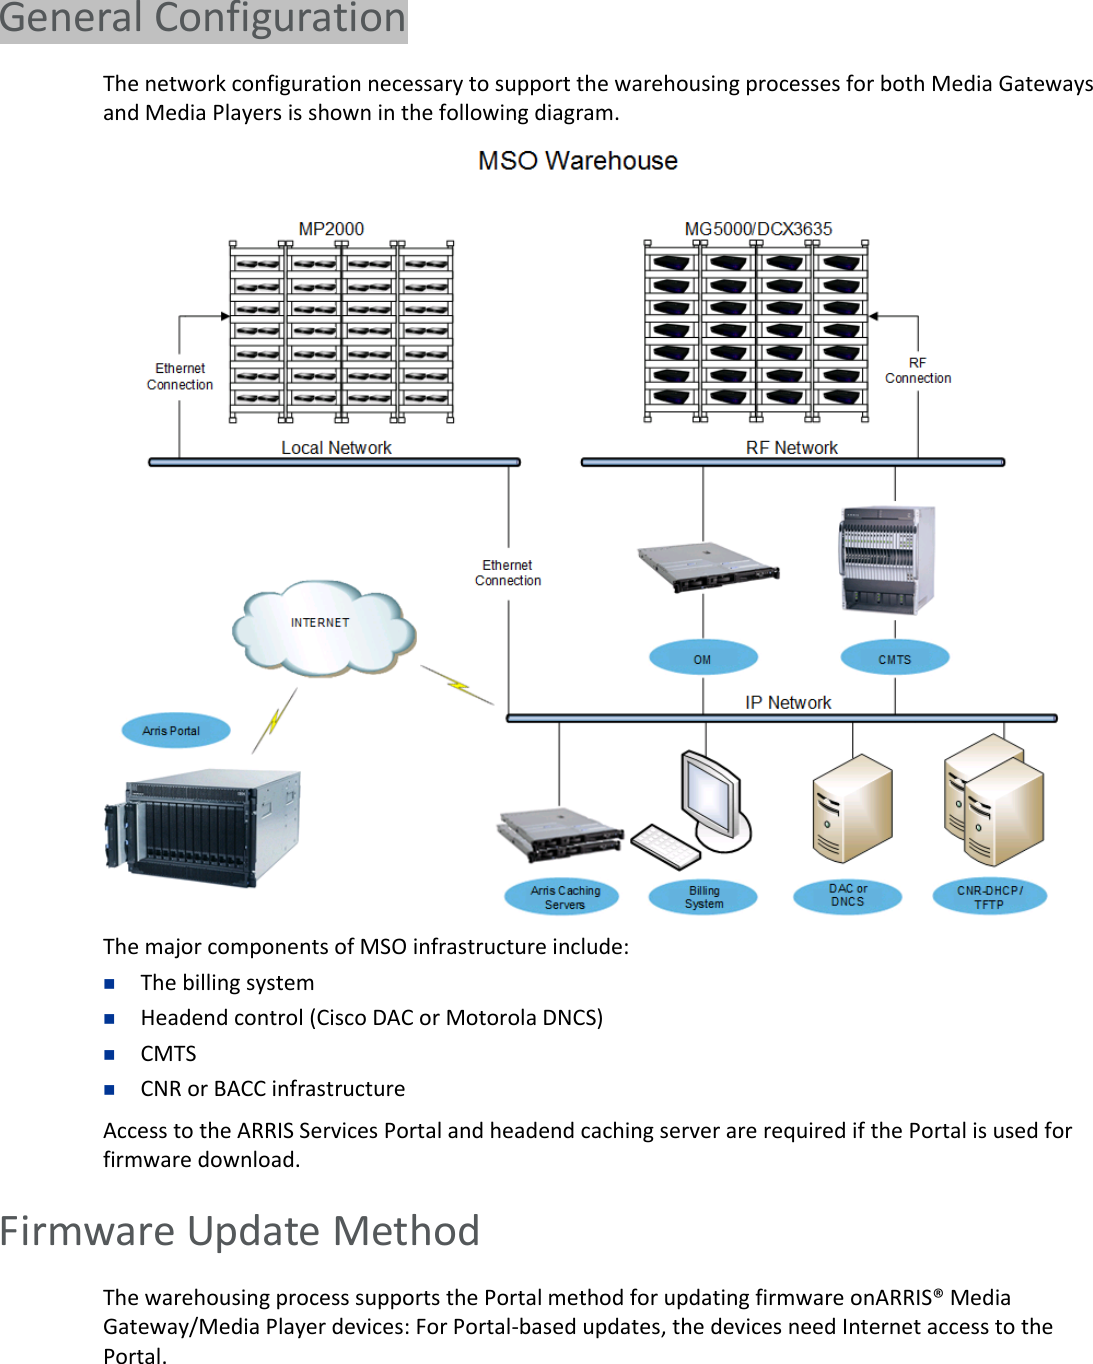   General Configuration The network configuration necessary to support the warehousing processes for both Media Gateways and Media Players is shown in the following diagram.  The major components of MSO infrastructure include:  The billing system  Headend control (Cisco DAC or Motorola DNCS)  CMTS  CNR or BACC infrastructure Access to the ARRIS Services Portal and headend caching server are required if the Portal is used for firmware download.    Firmware Update Method The warehousing process supports the Portal method for updating firmware onARRIS® Media Gateway/Media Player devices: For Portal-based updates, the devices need Internet access to the Portal. 